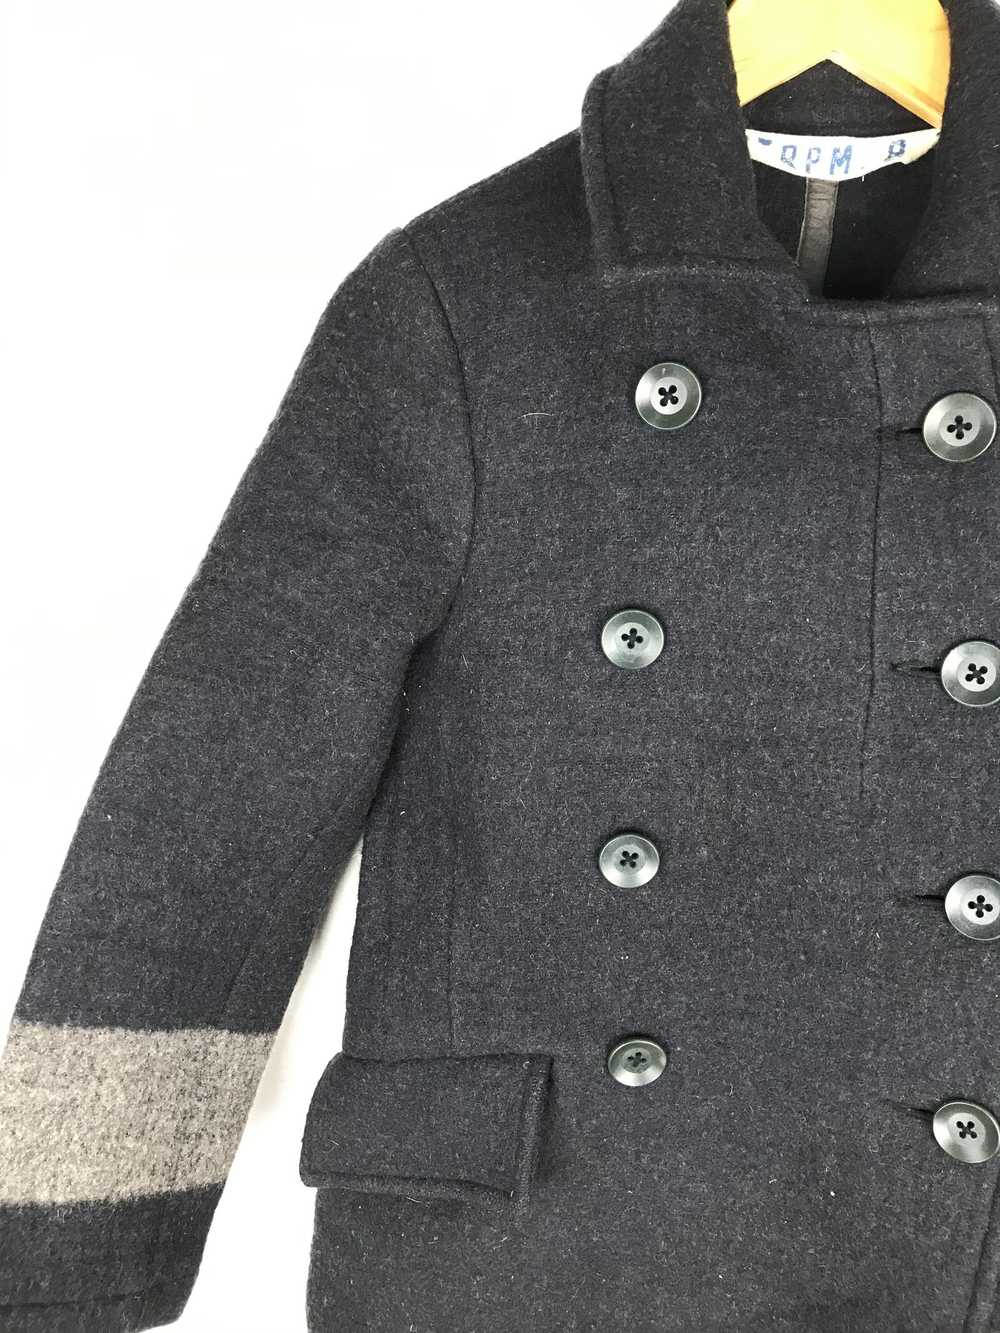 45rpm 45Rpm Wool Jacket, 100 % made in Japan - image 2